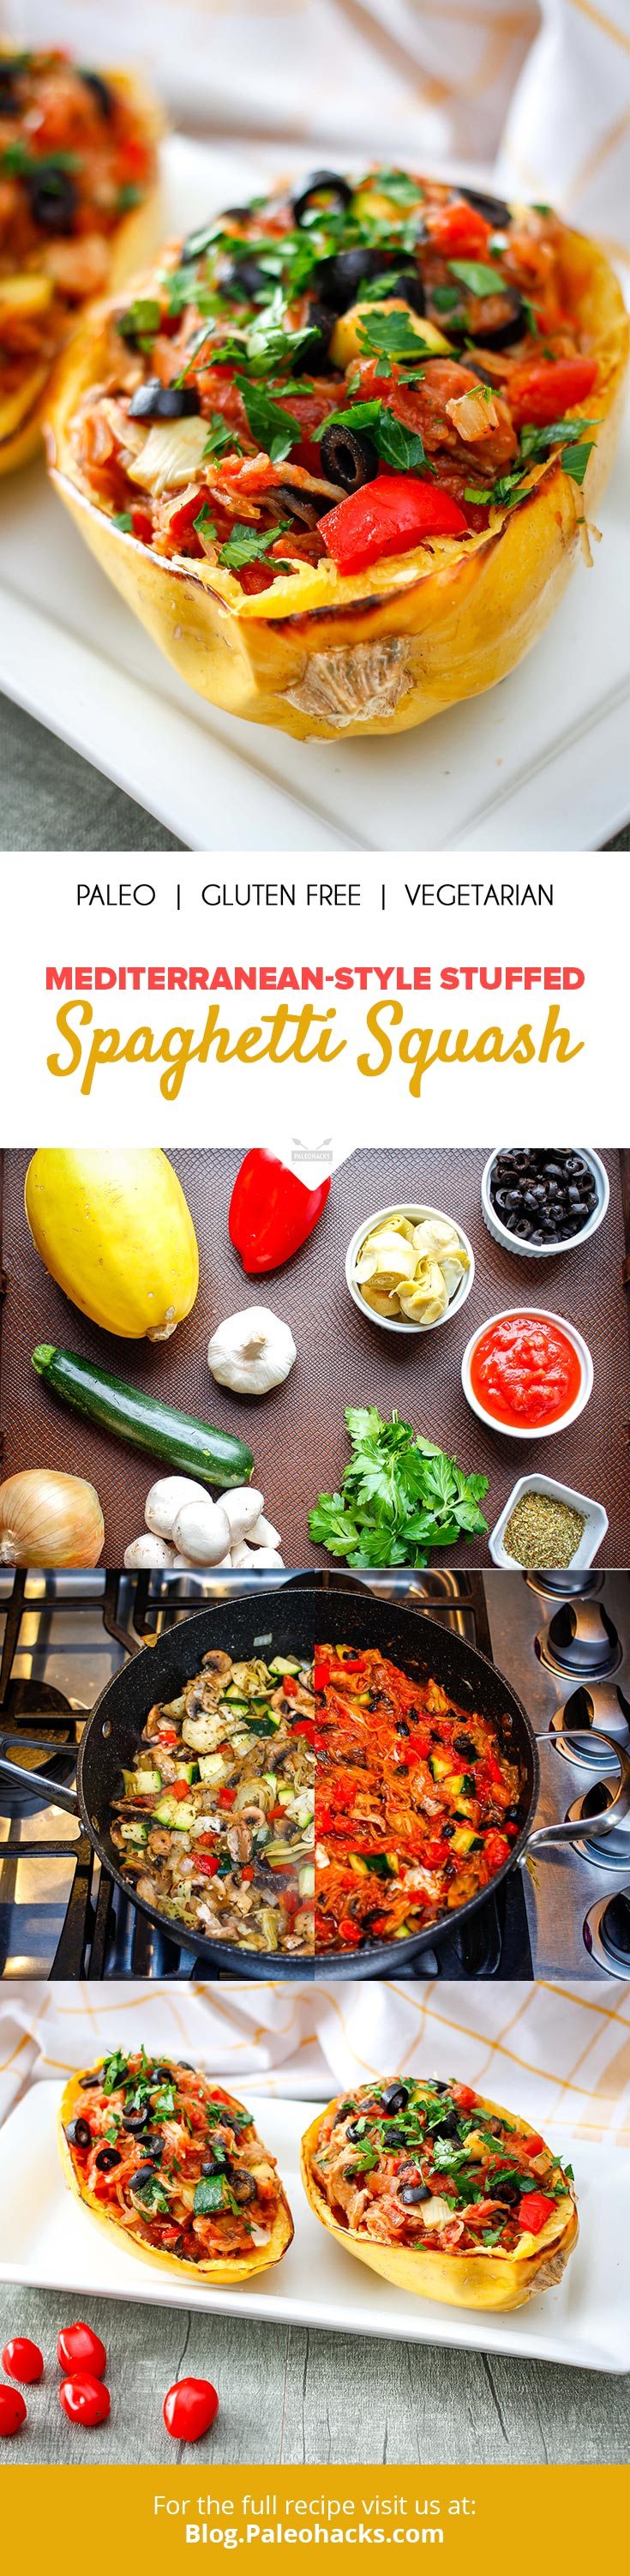 Cook up a delicious Mediterranean-inspired meal you can eat right in the squash - no extra dishes necessary. Say hello to your new favorite recipe.